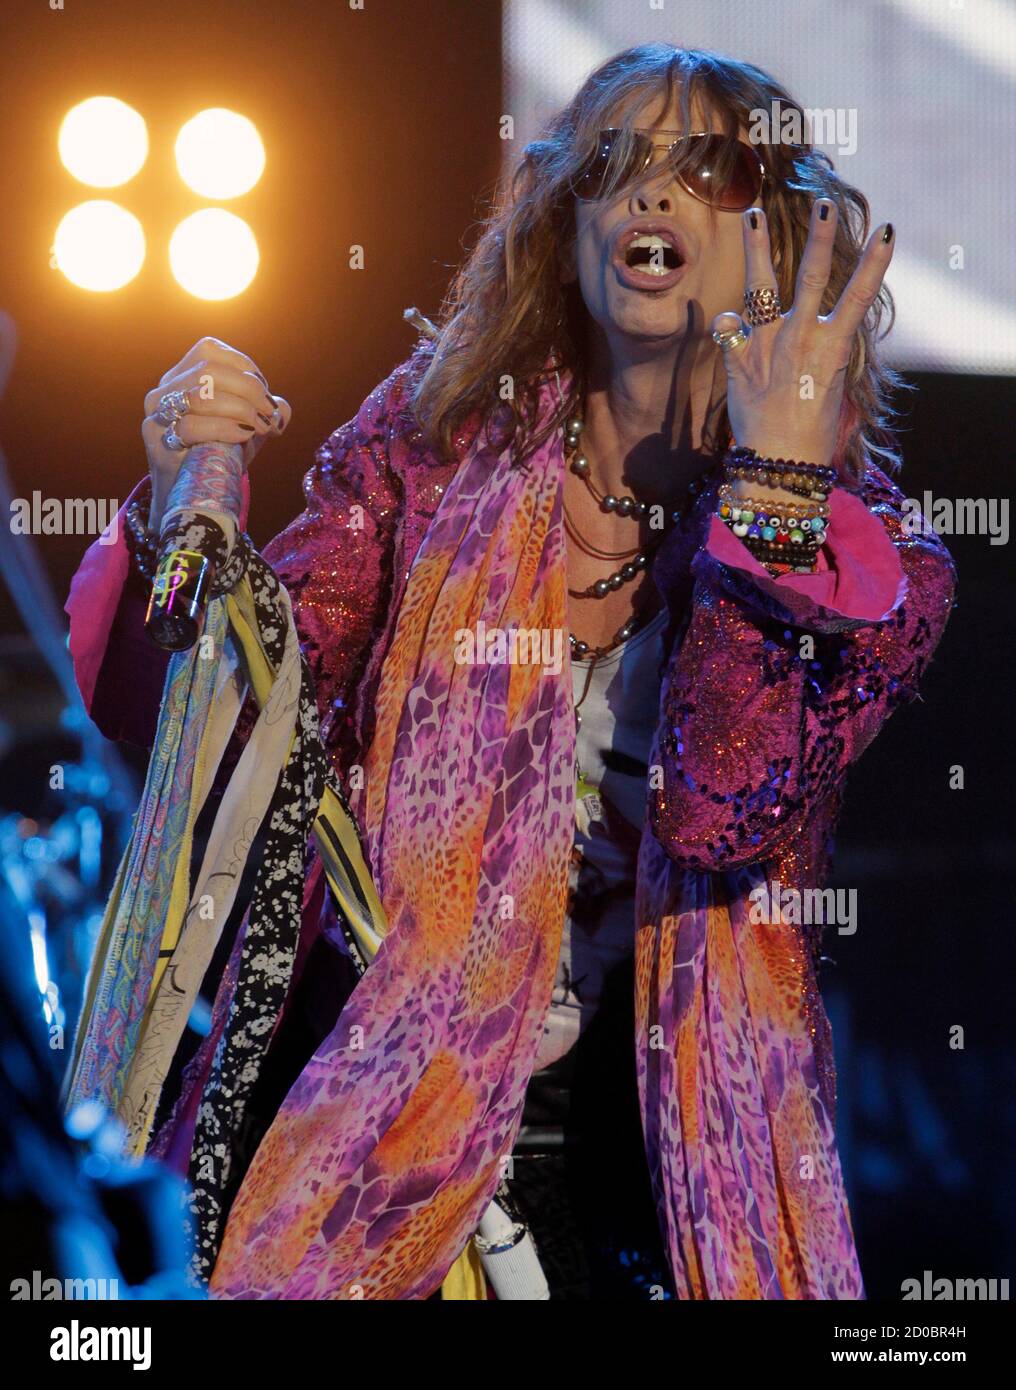 Steven Tyler, the lead singer of rock band Aerosmith, performs during a  concert on the first stop of their Latin America tour at the Jockey Club in  Asuncion October 26, 2011. Tyler,